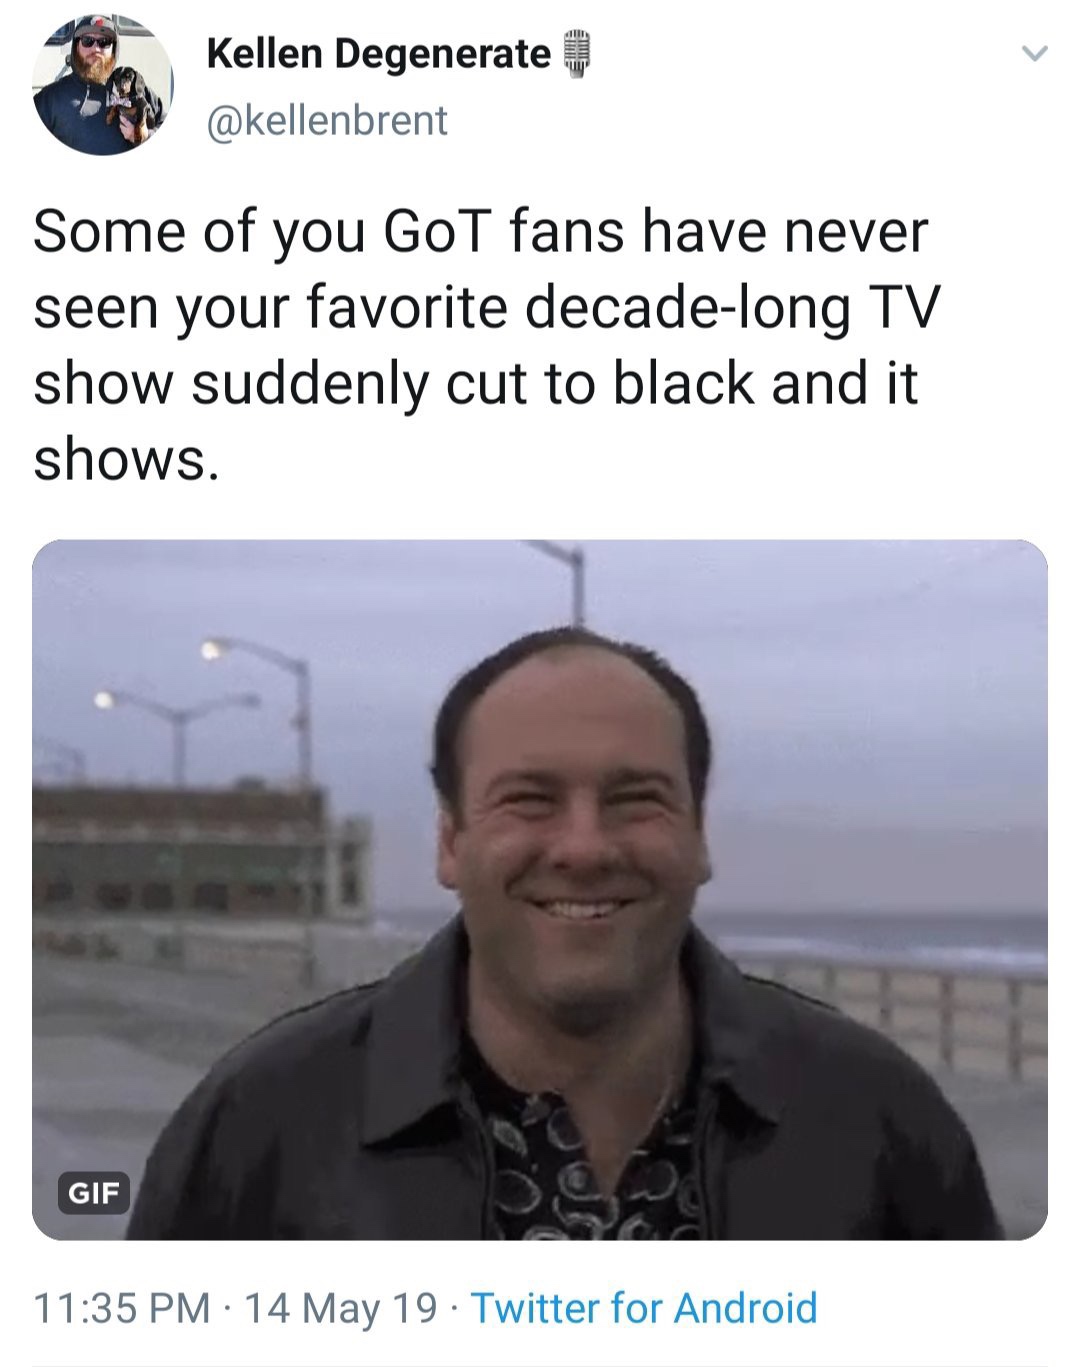 funny memes - meme of tony soprano smile - Kellen Degenerate @ Some of you GoT fans have never seen your favorite decadelong Tv show suddenly cut to black and it shows. Gif 14 May 19 Twitter for Android